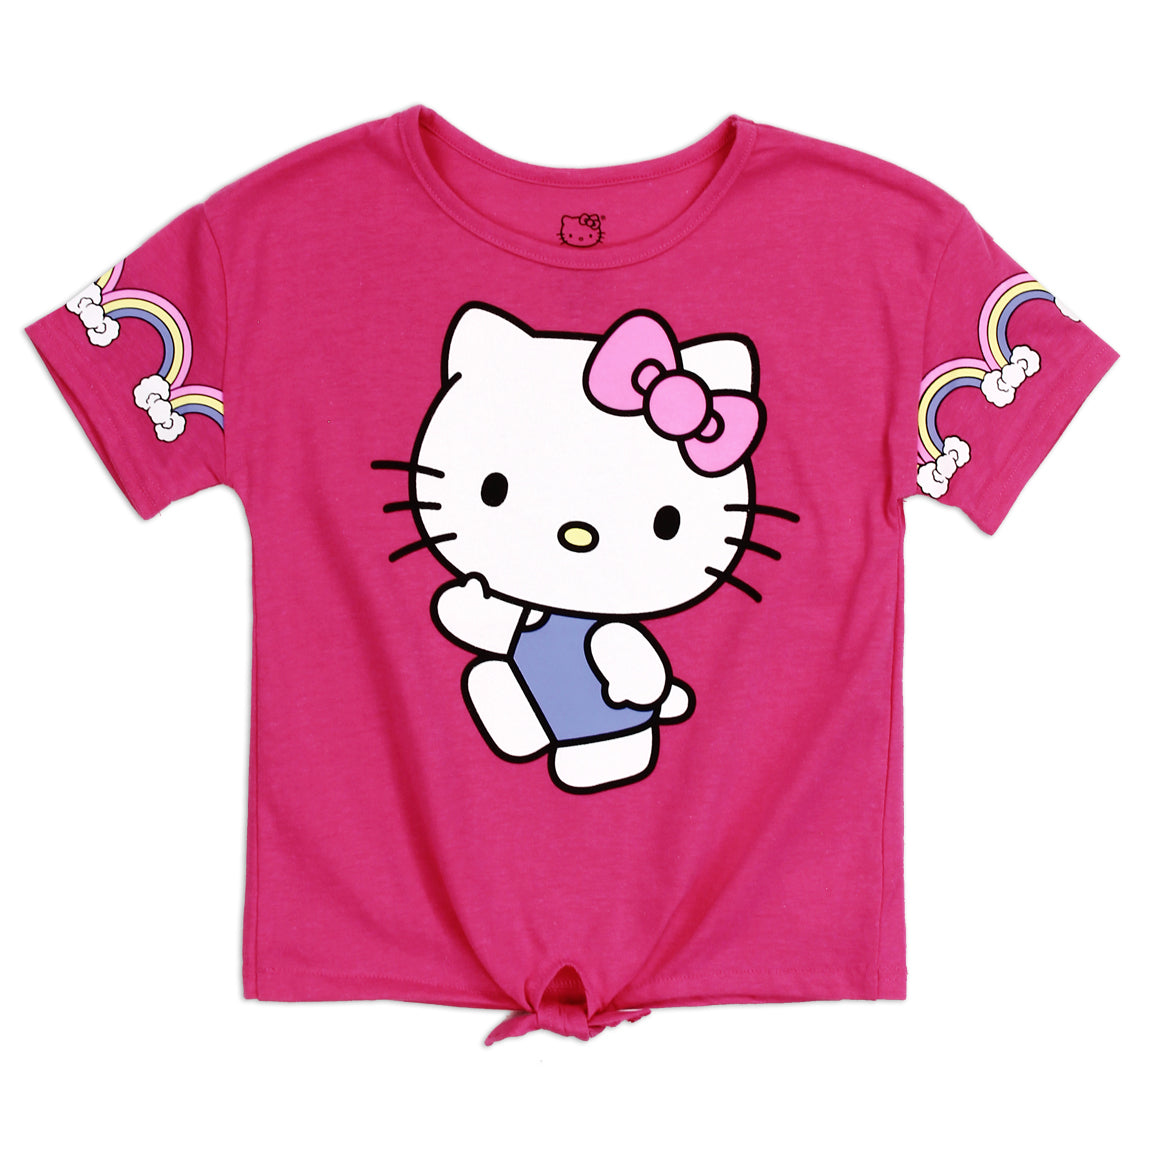 HELLO KITTY Girls 4-6X Fashion Top (Pack of 6)